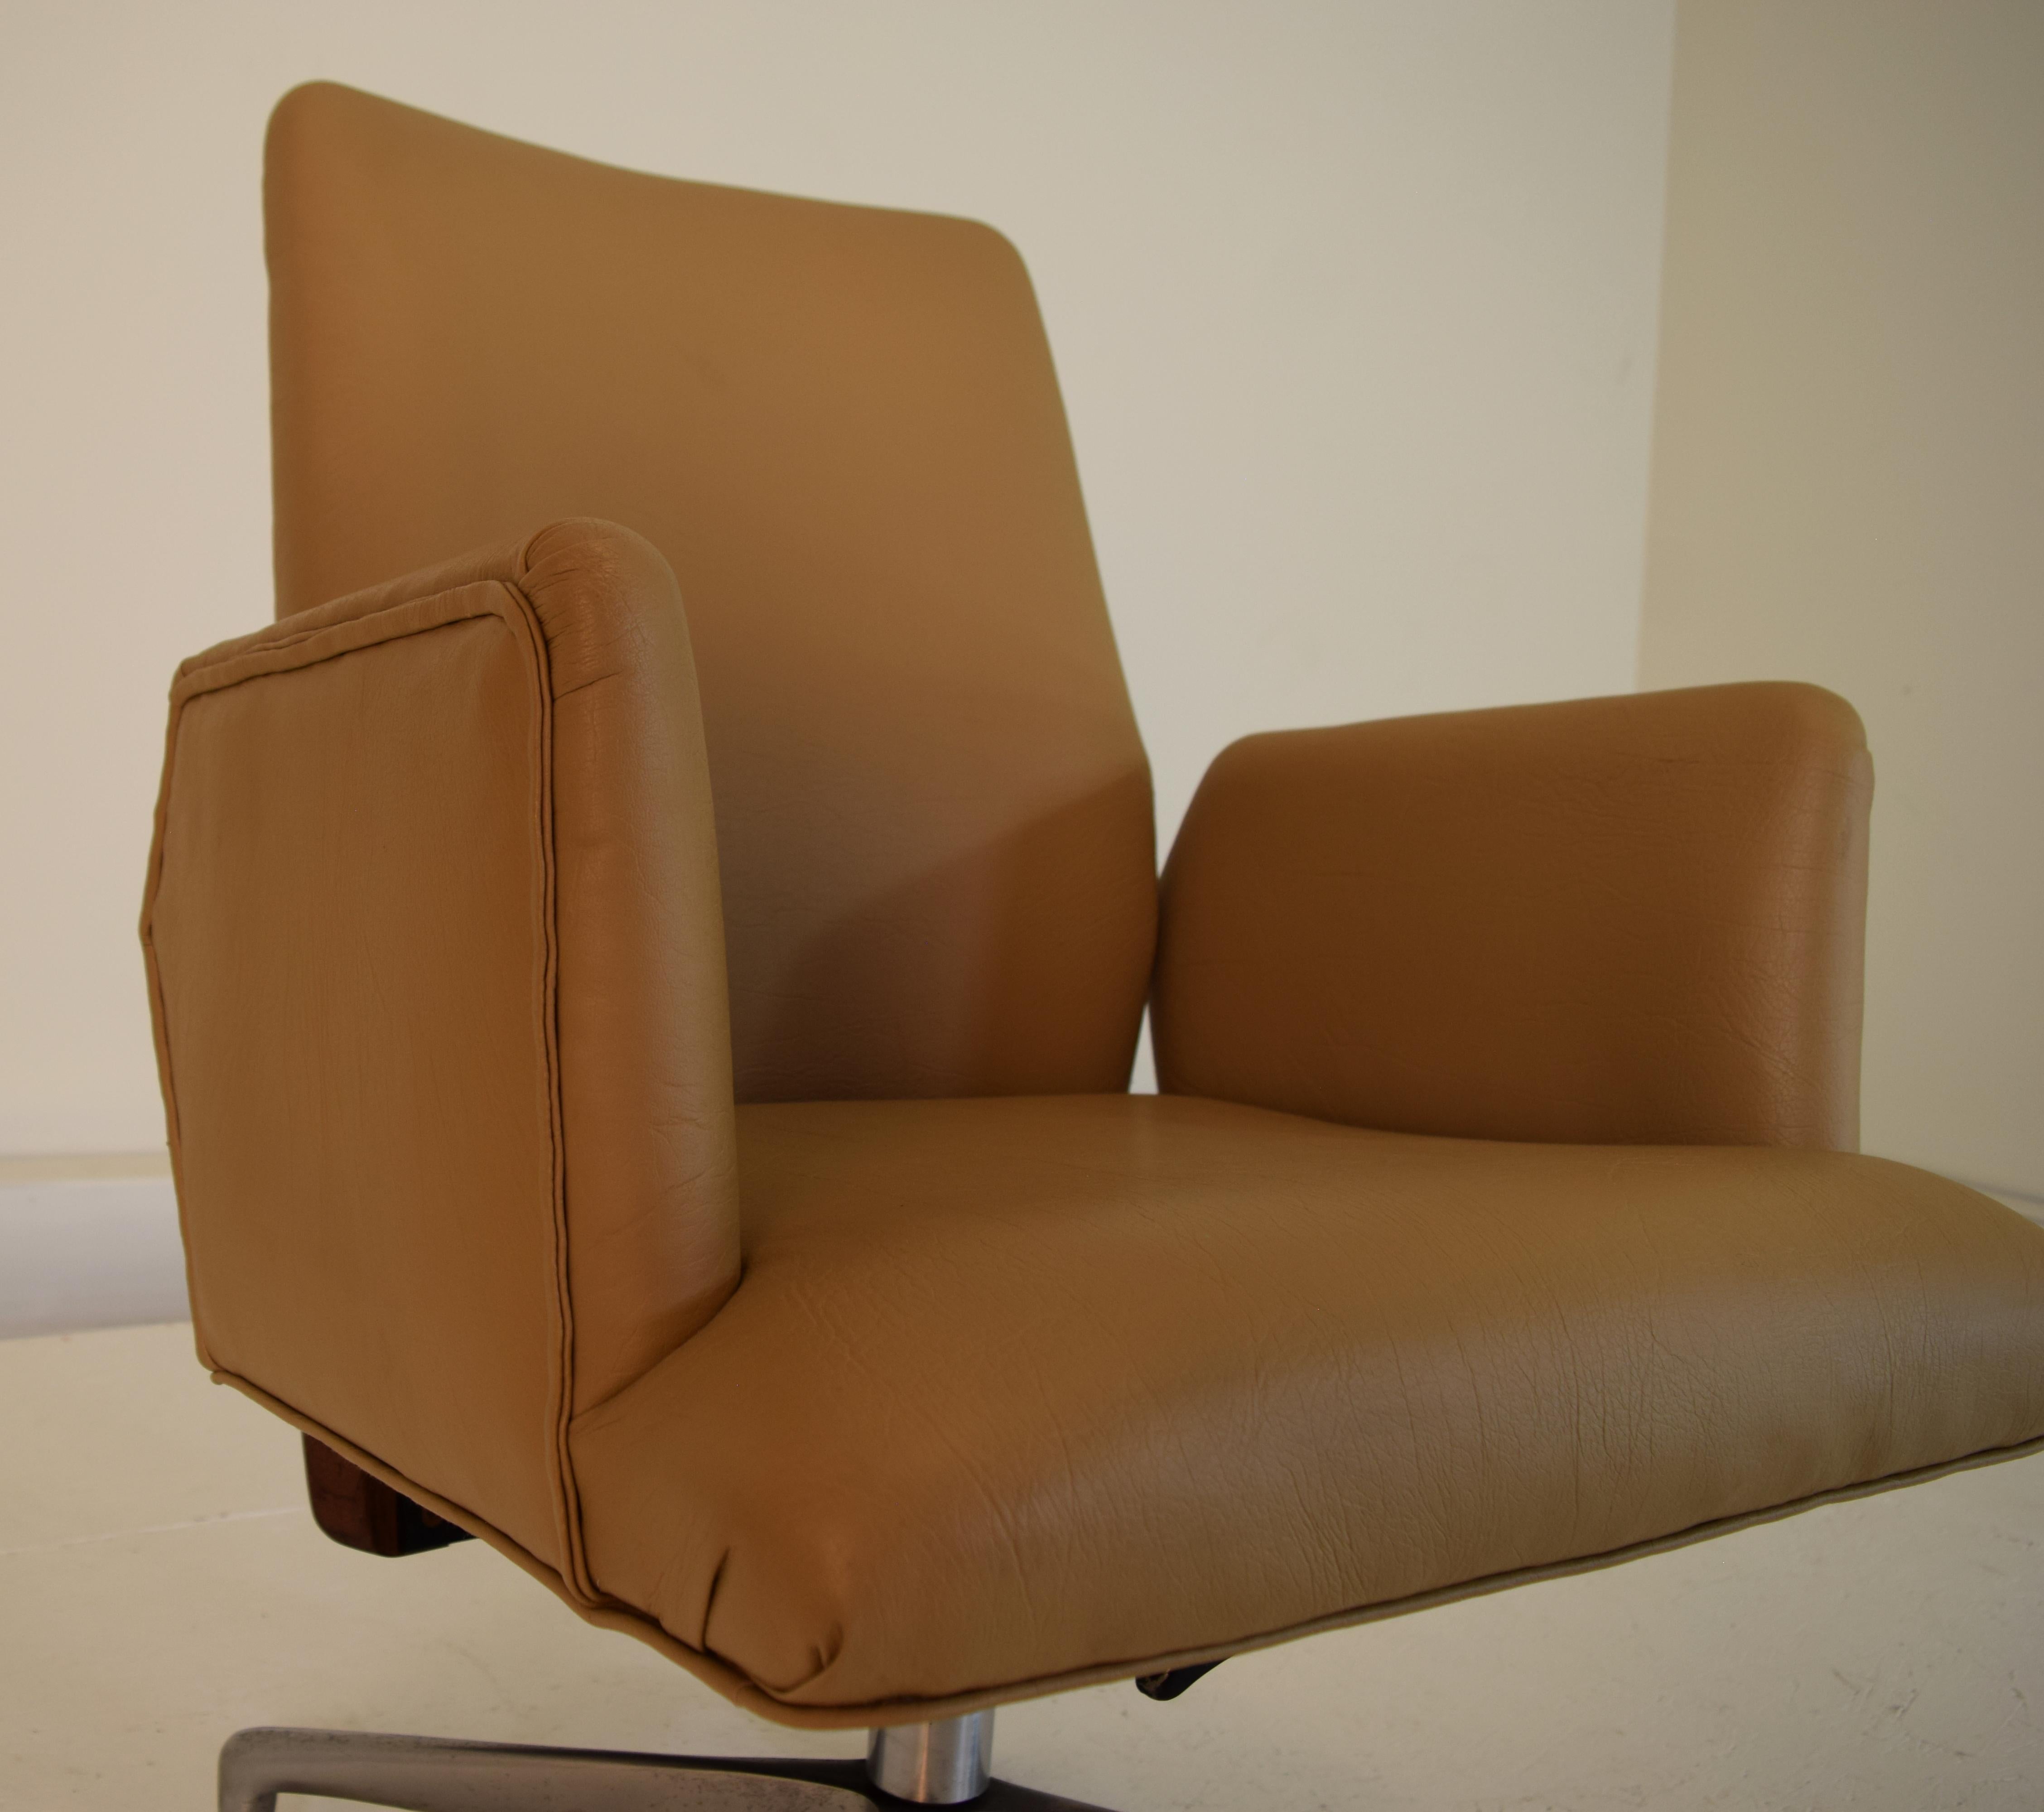 Premium Executive Swivel Tilt Executive Office Chair In Excellent Condition In South Charleston, WV